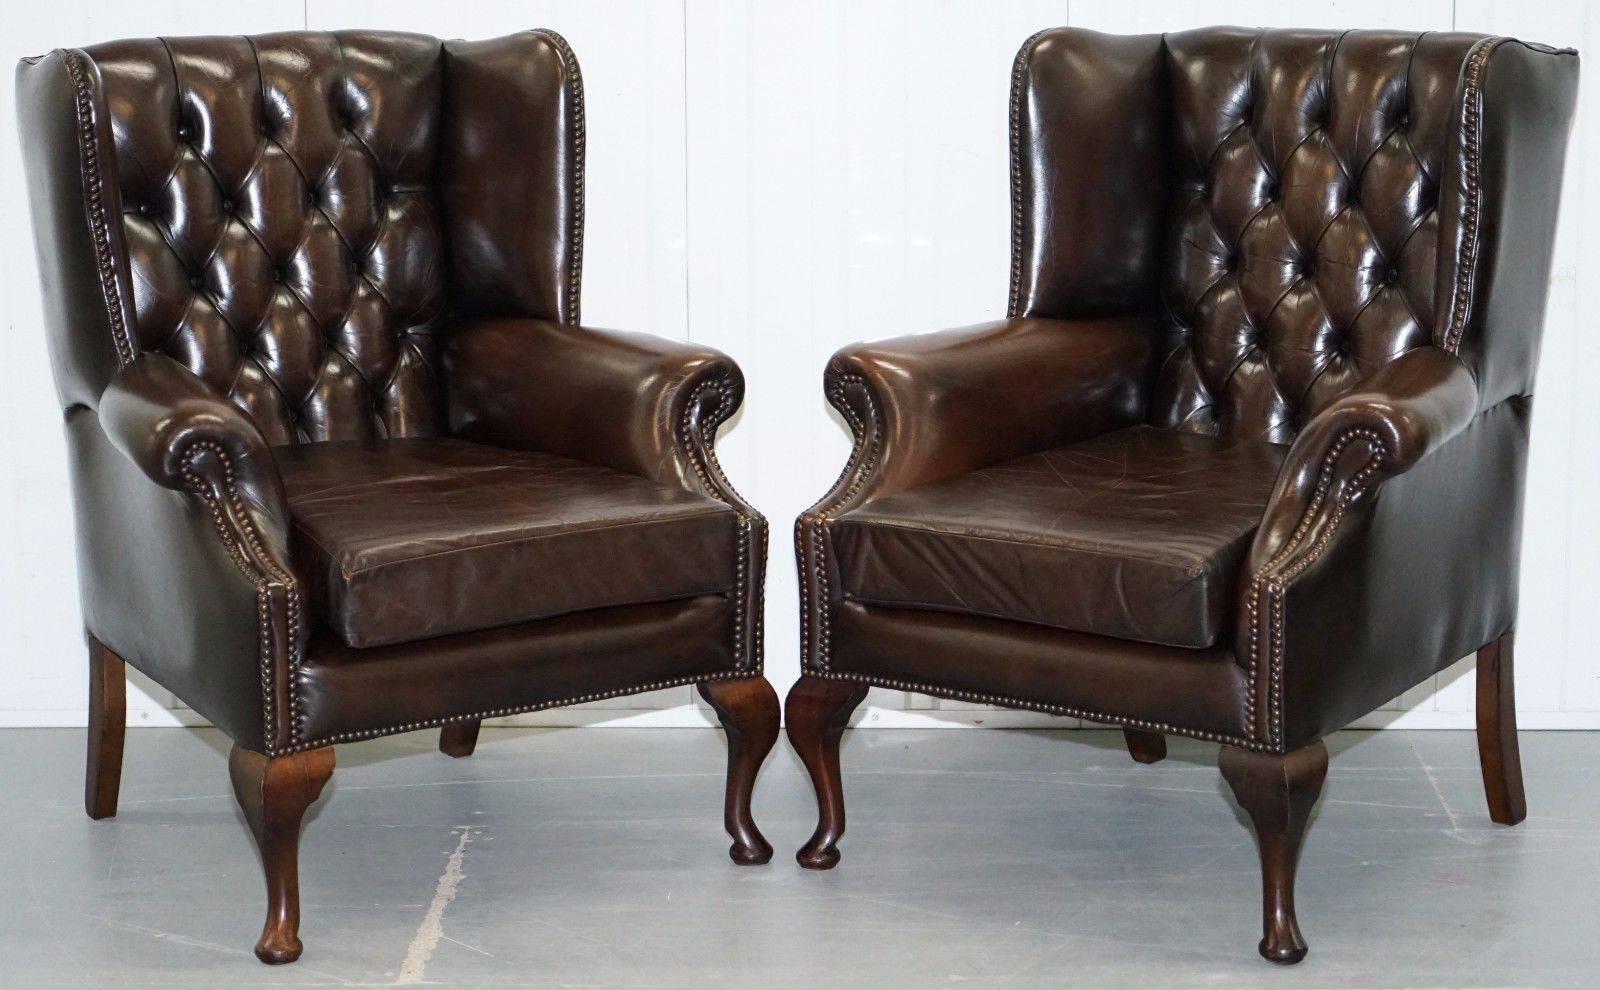 We are delighted to offer for sale this lovely pair of circa 1960, aged brown leather Chesterfield Wingback armchairs with matching ottoman footstool

A very good looking and comfortable pair in lightly restored condition throughout

These are